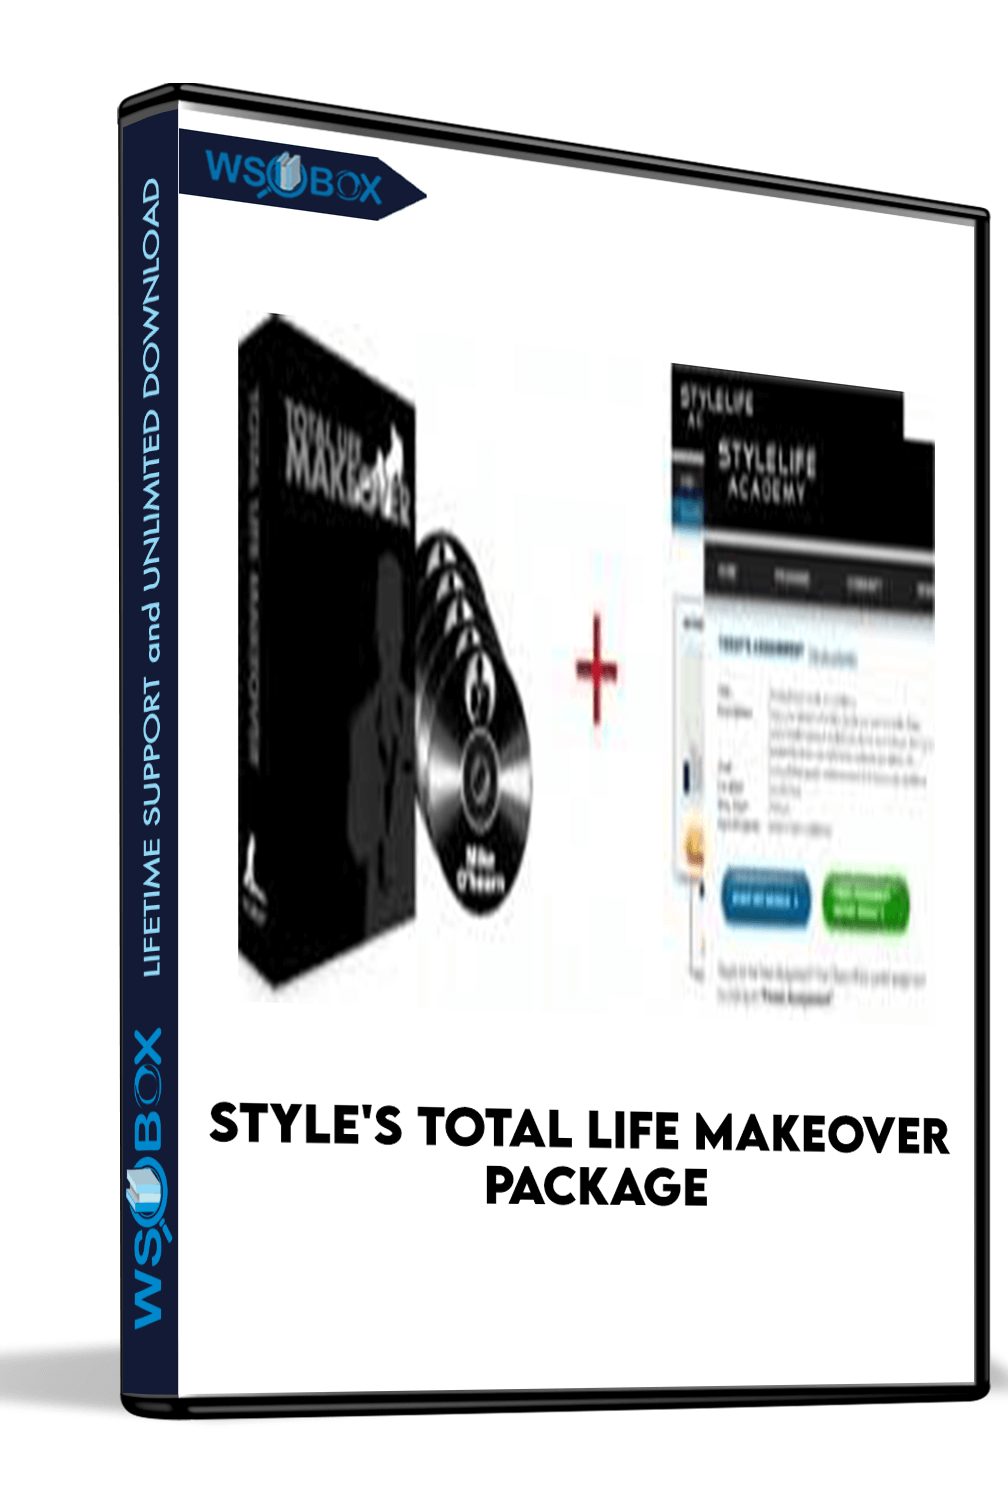 styles-total-life-makeover-package